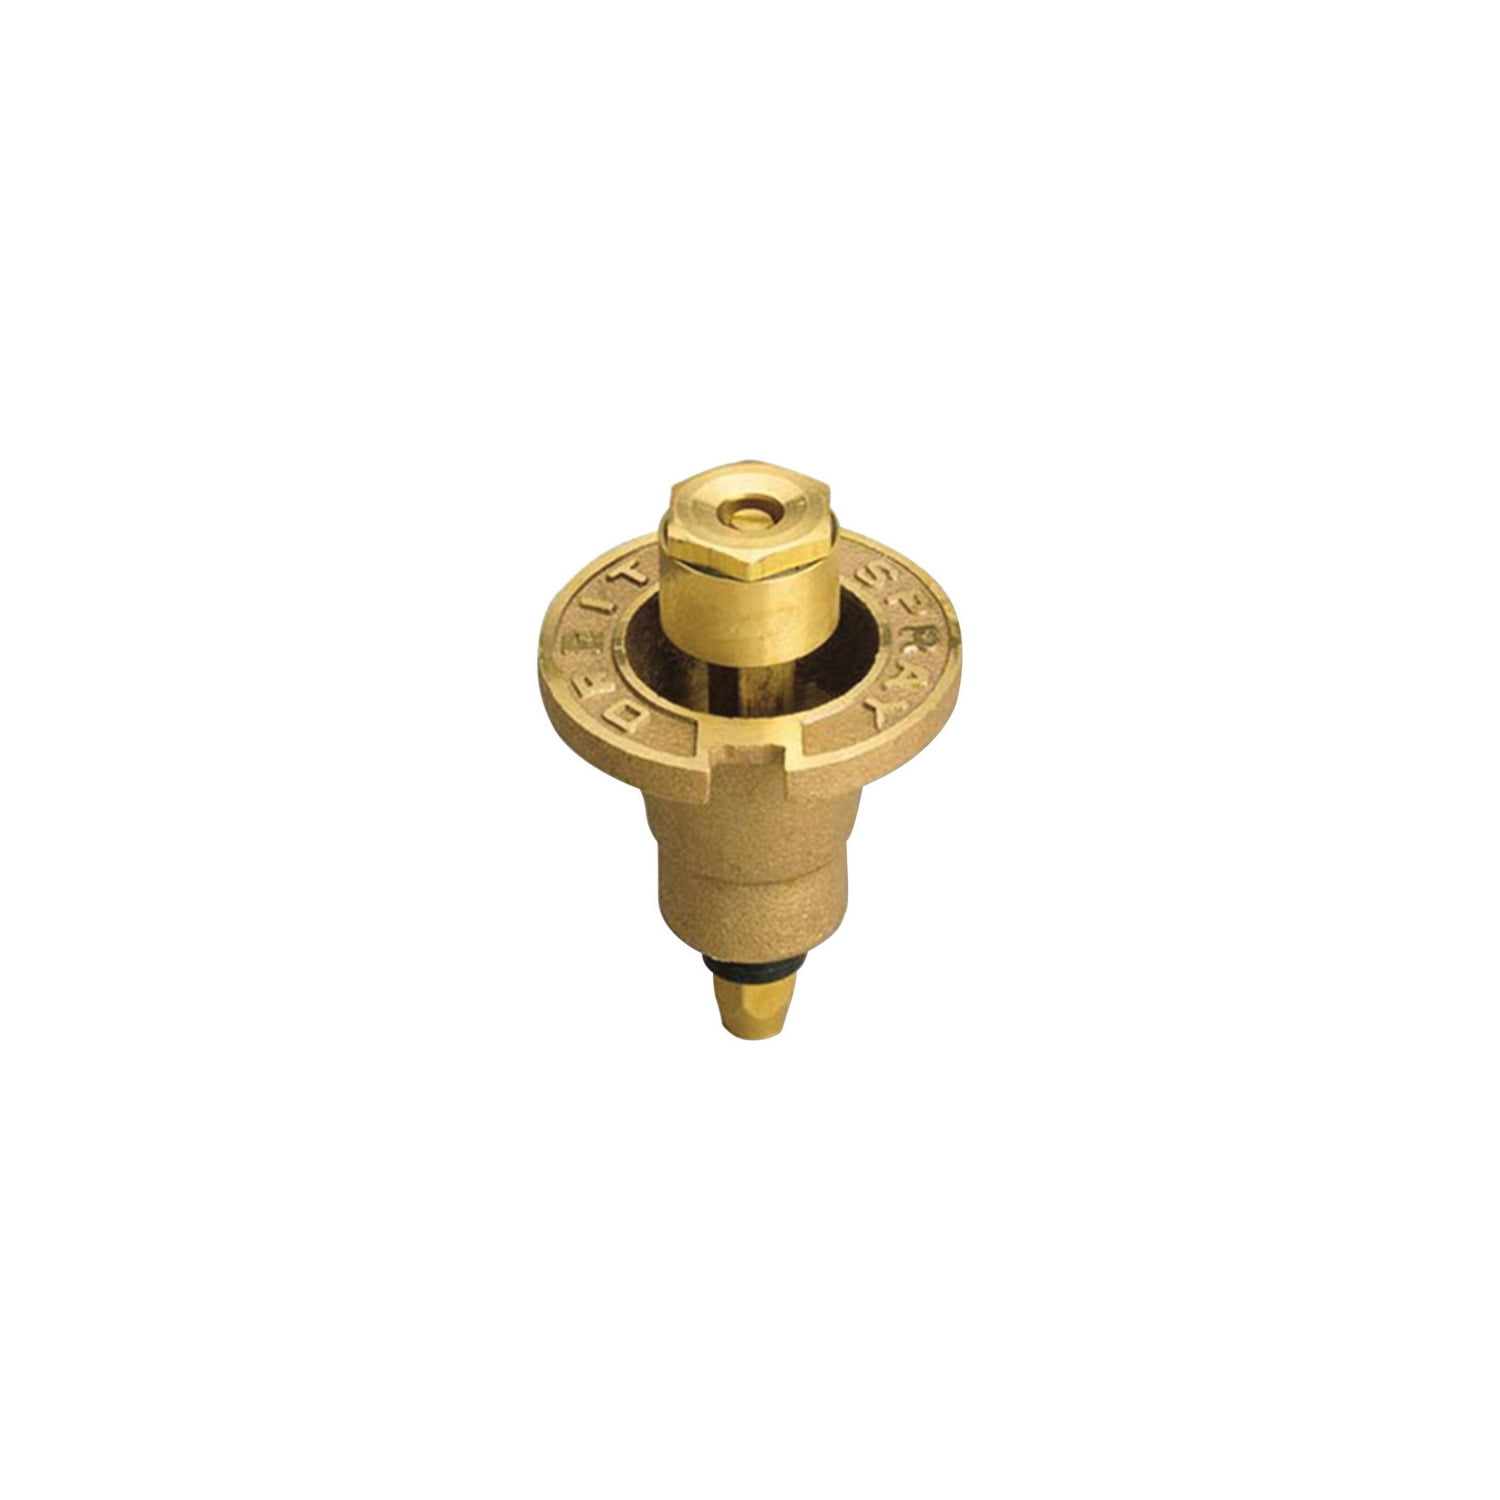 Orbit 54071 Sprinkler Head with Nozzle, 1/2 in Connection, FNPT